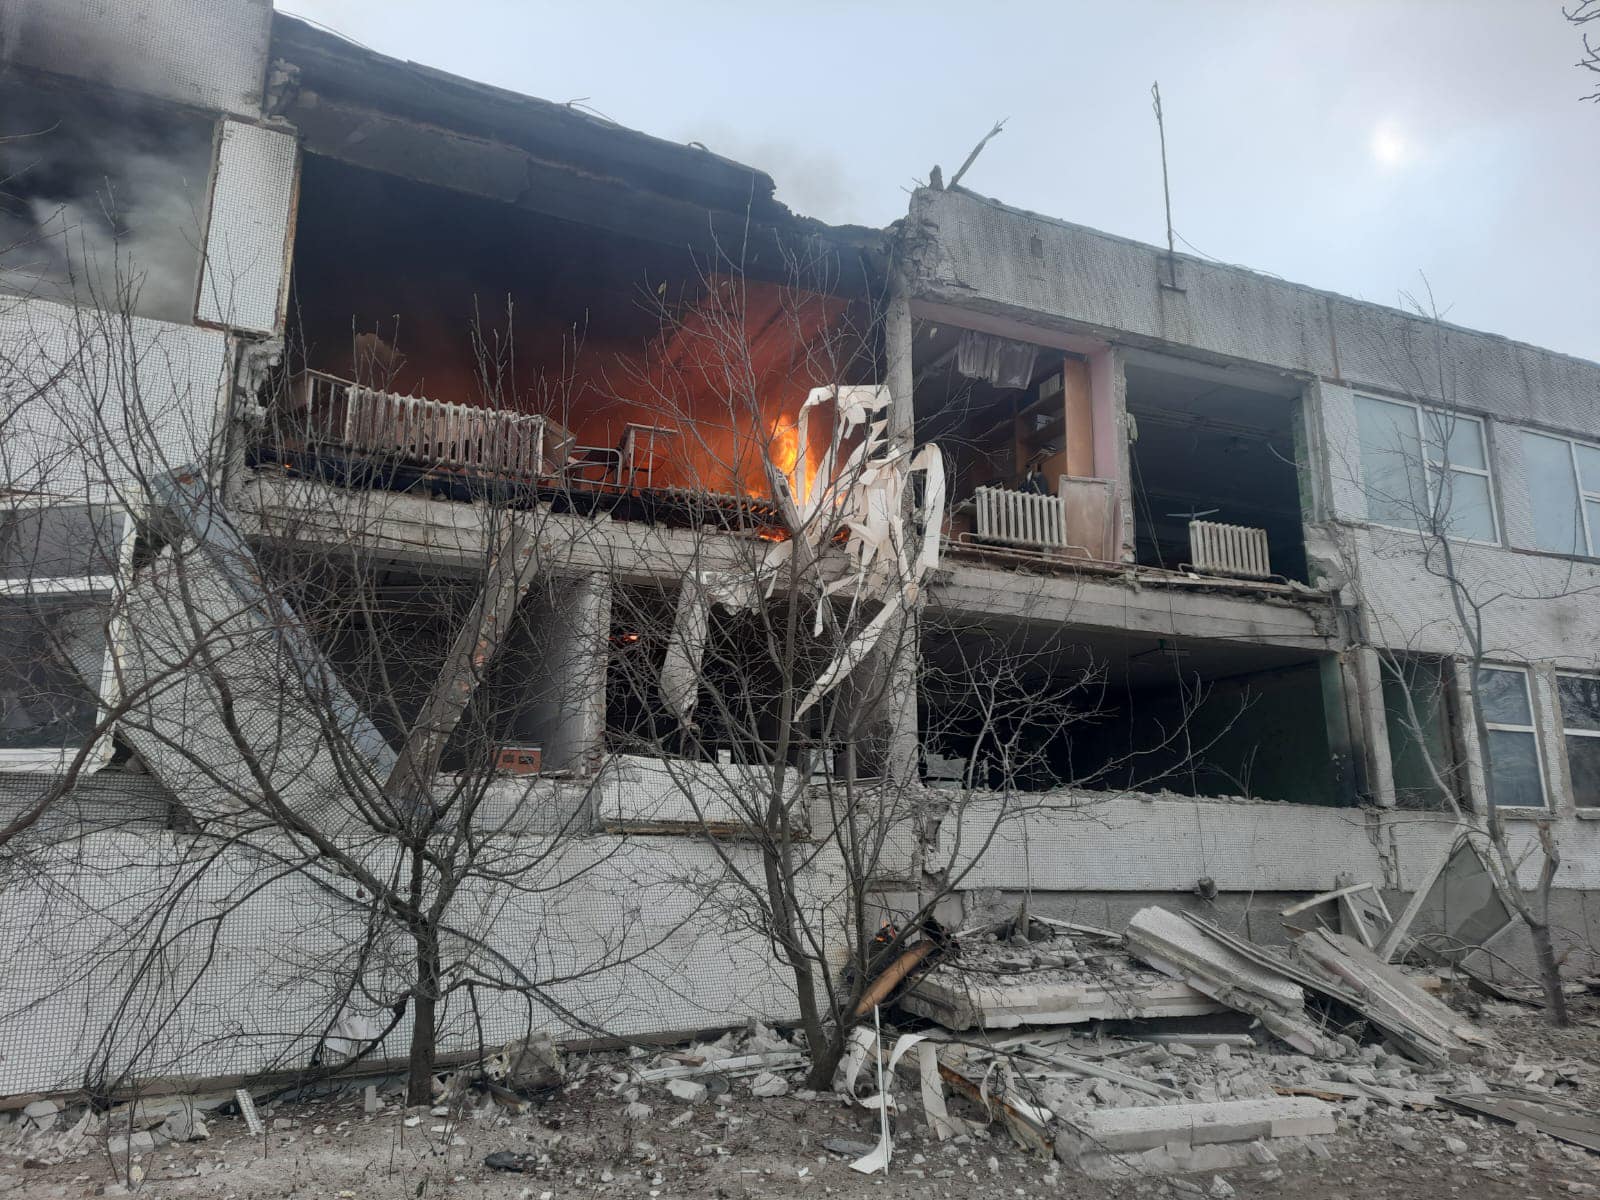 The Russian military struck two areas in the Kharkiv region, causing damage to buildings and a business